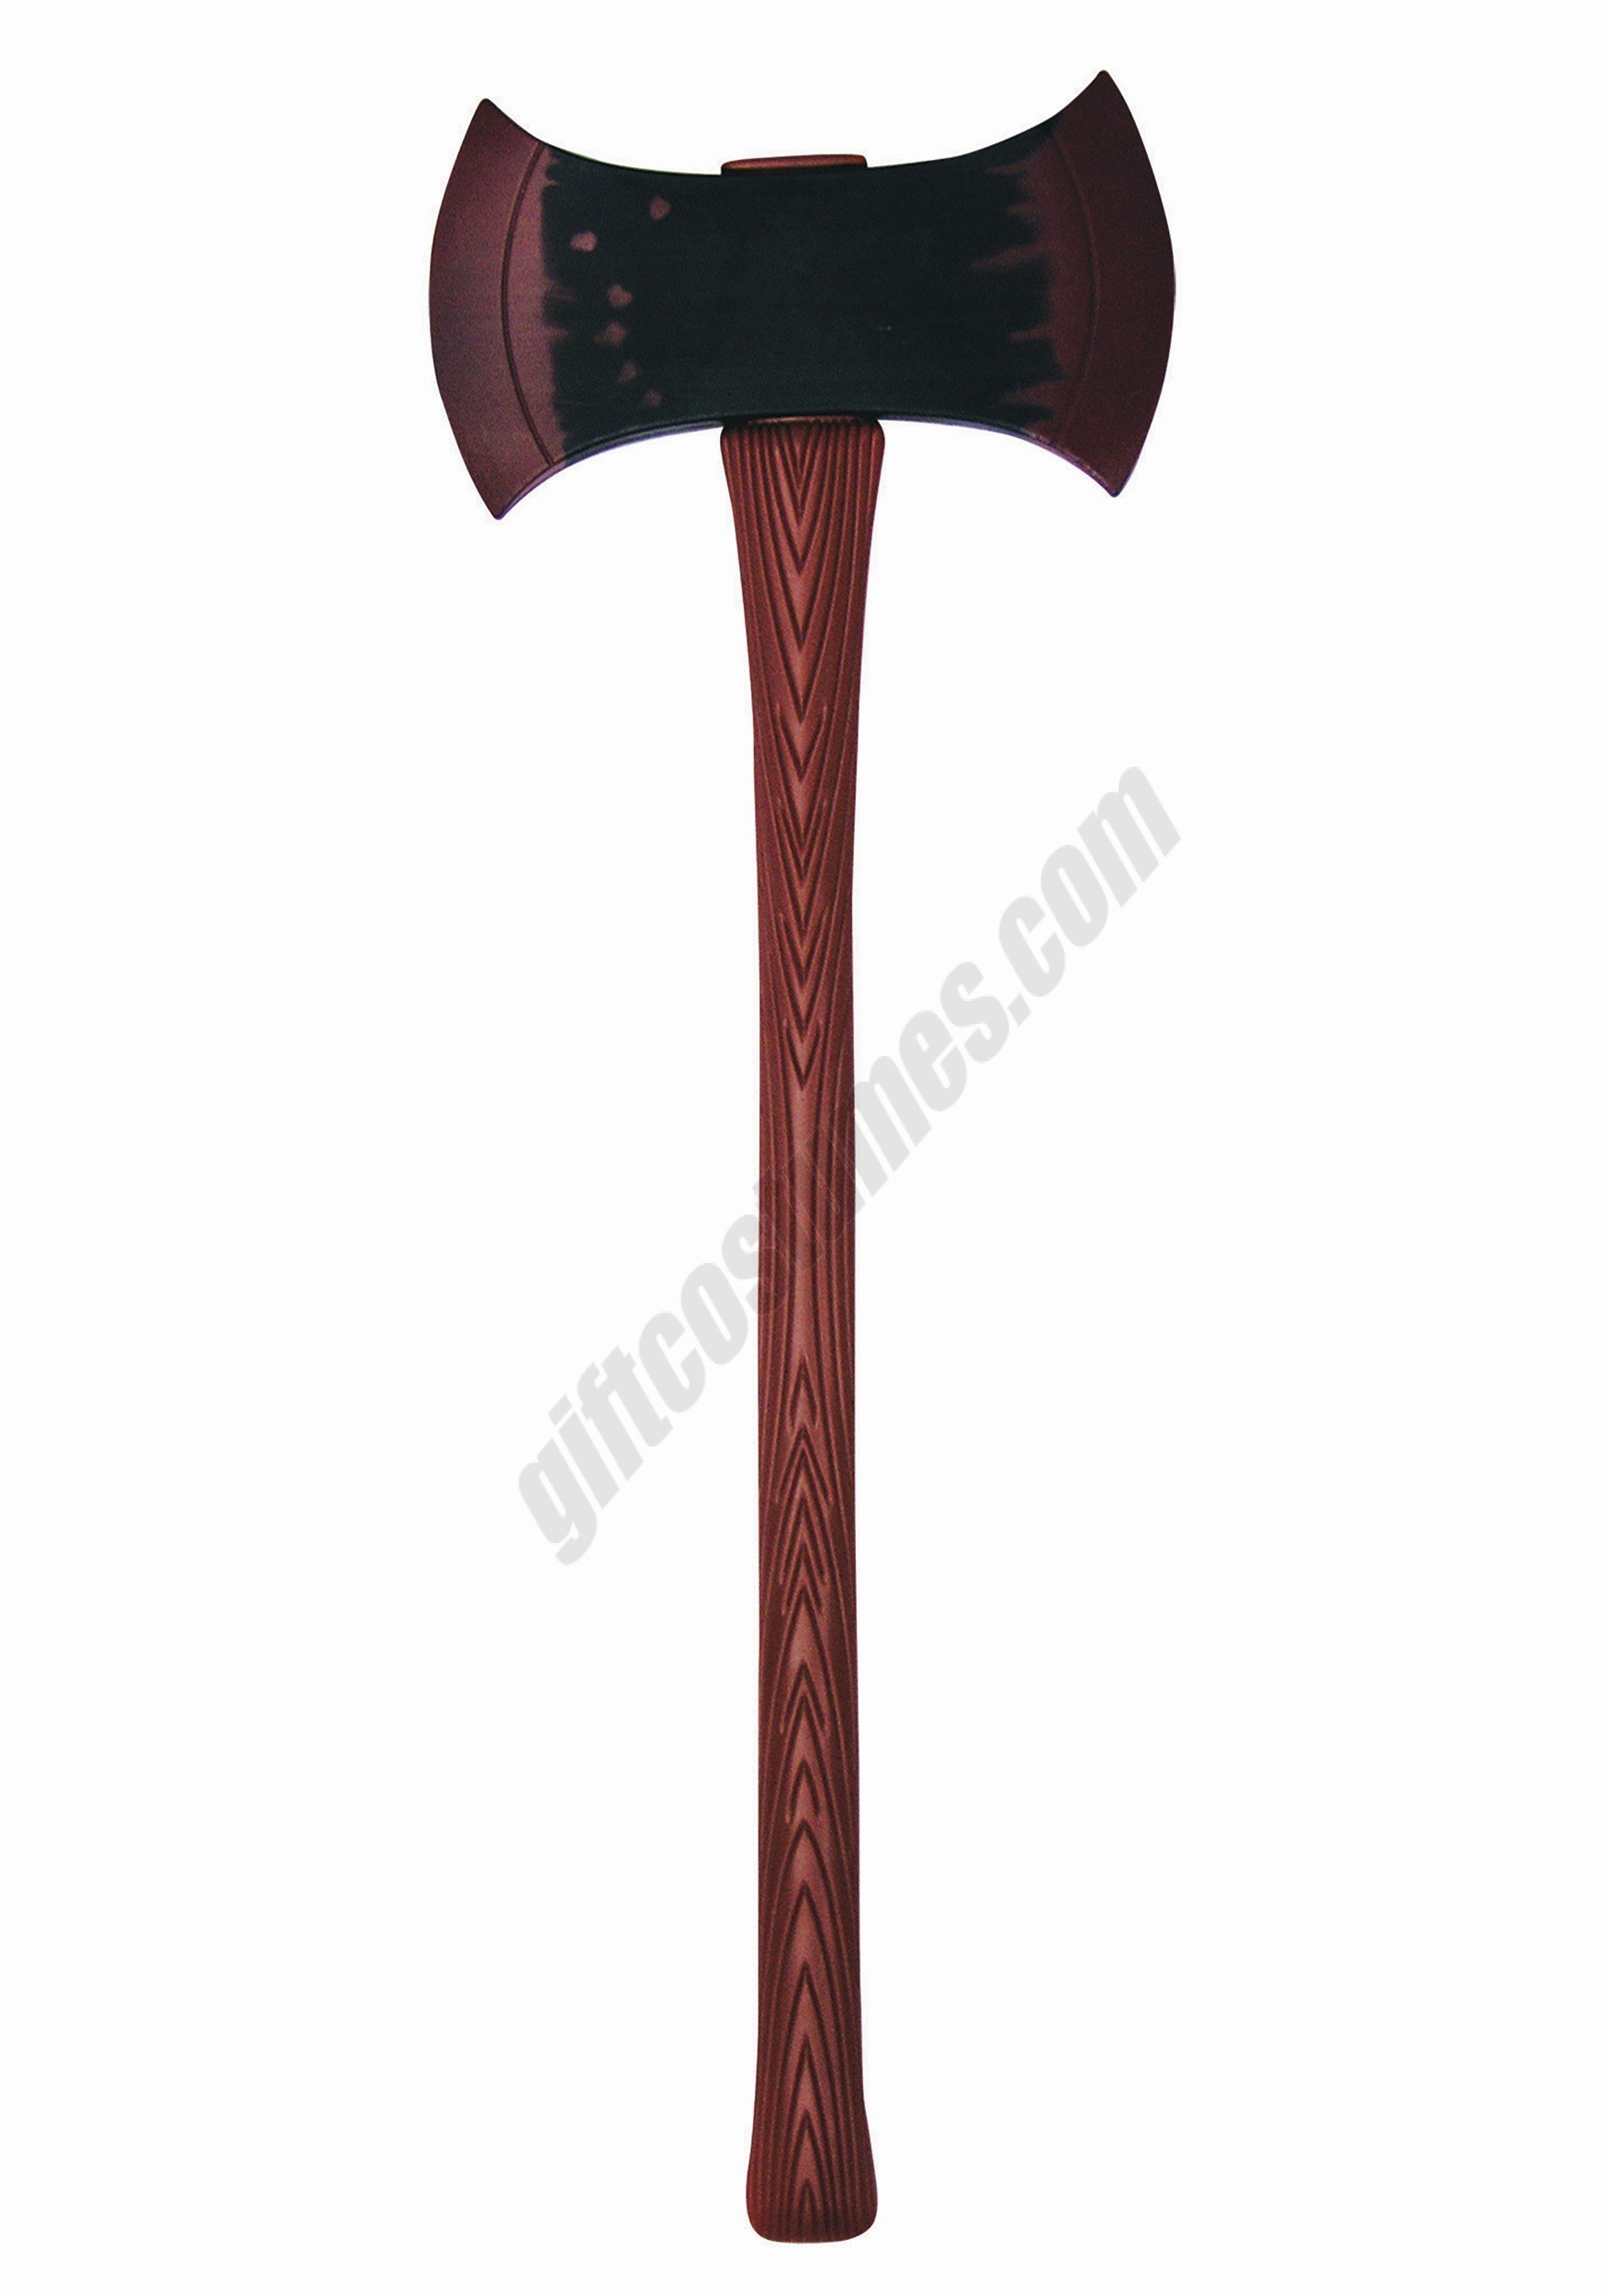 Giant Double Blade Axe Promotions - Giant Double Blade Axe Promotions